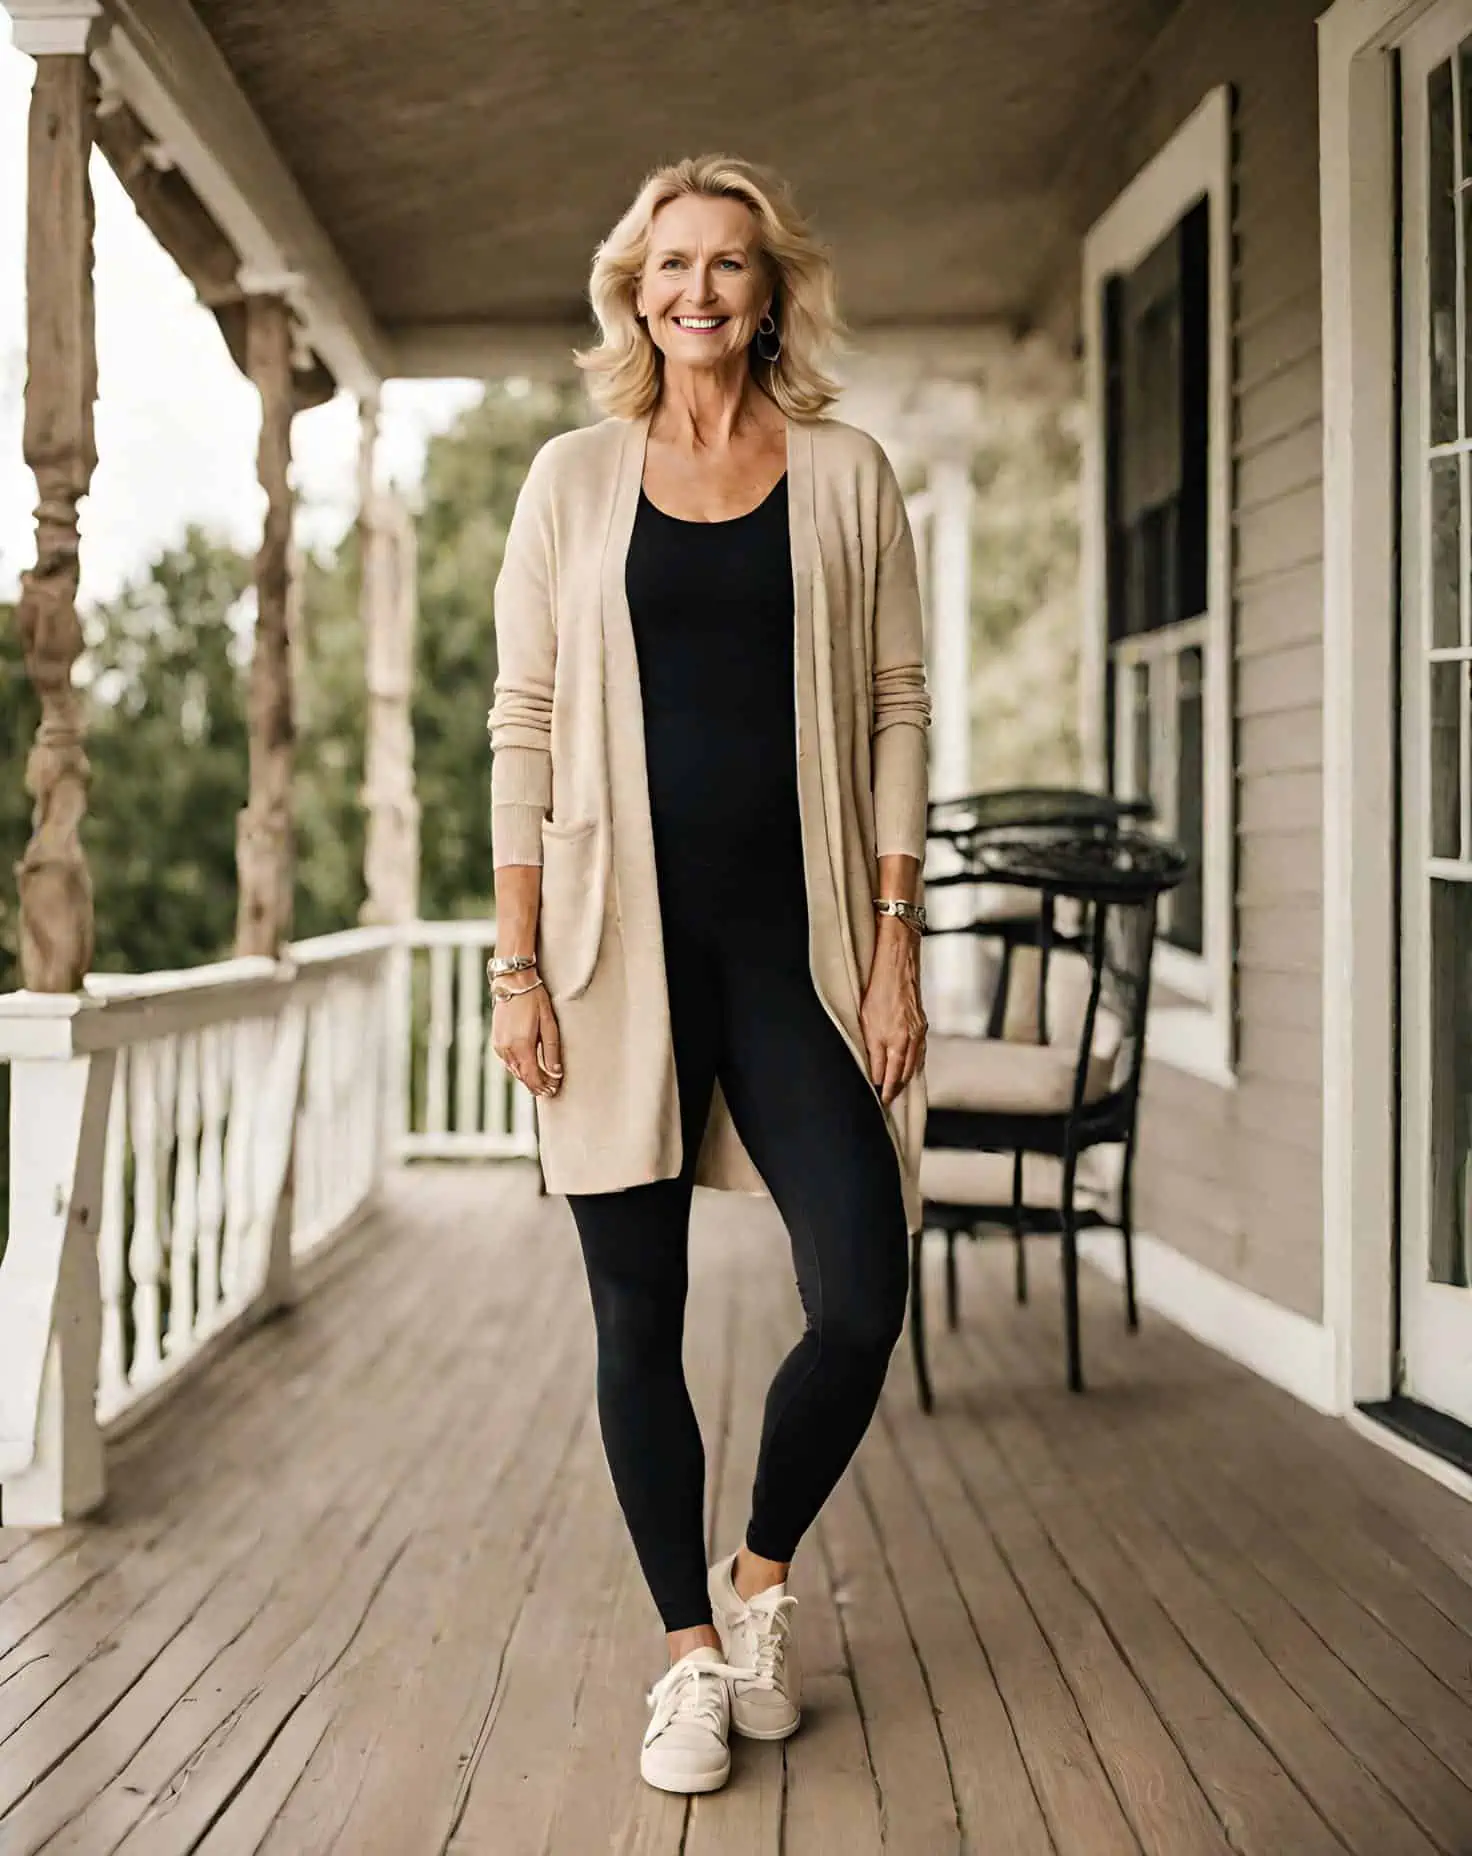 12 Types of Pants Best for Women Over 60 - Petite Dressing